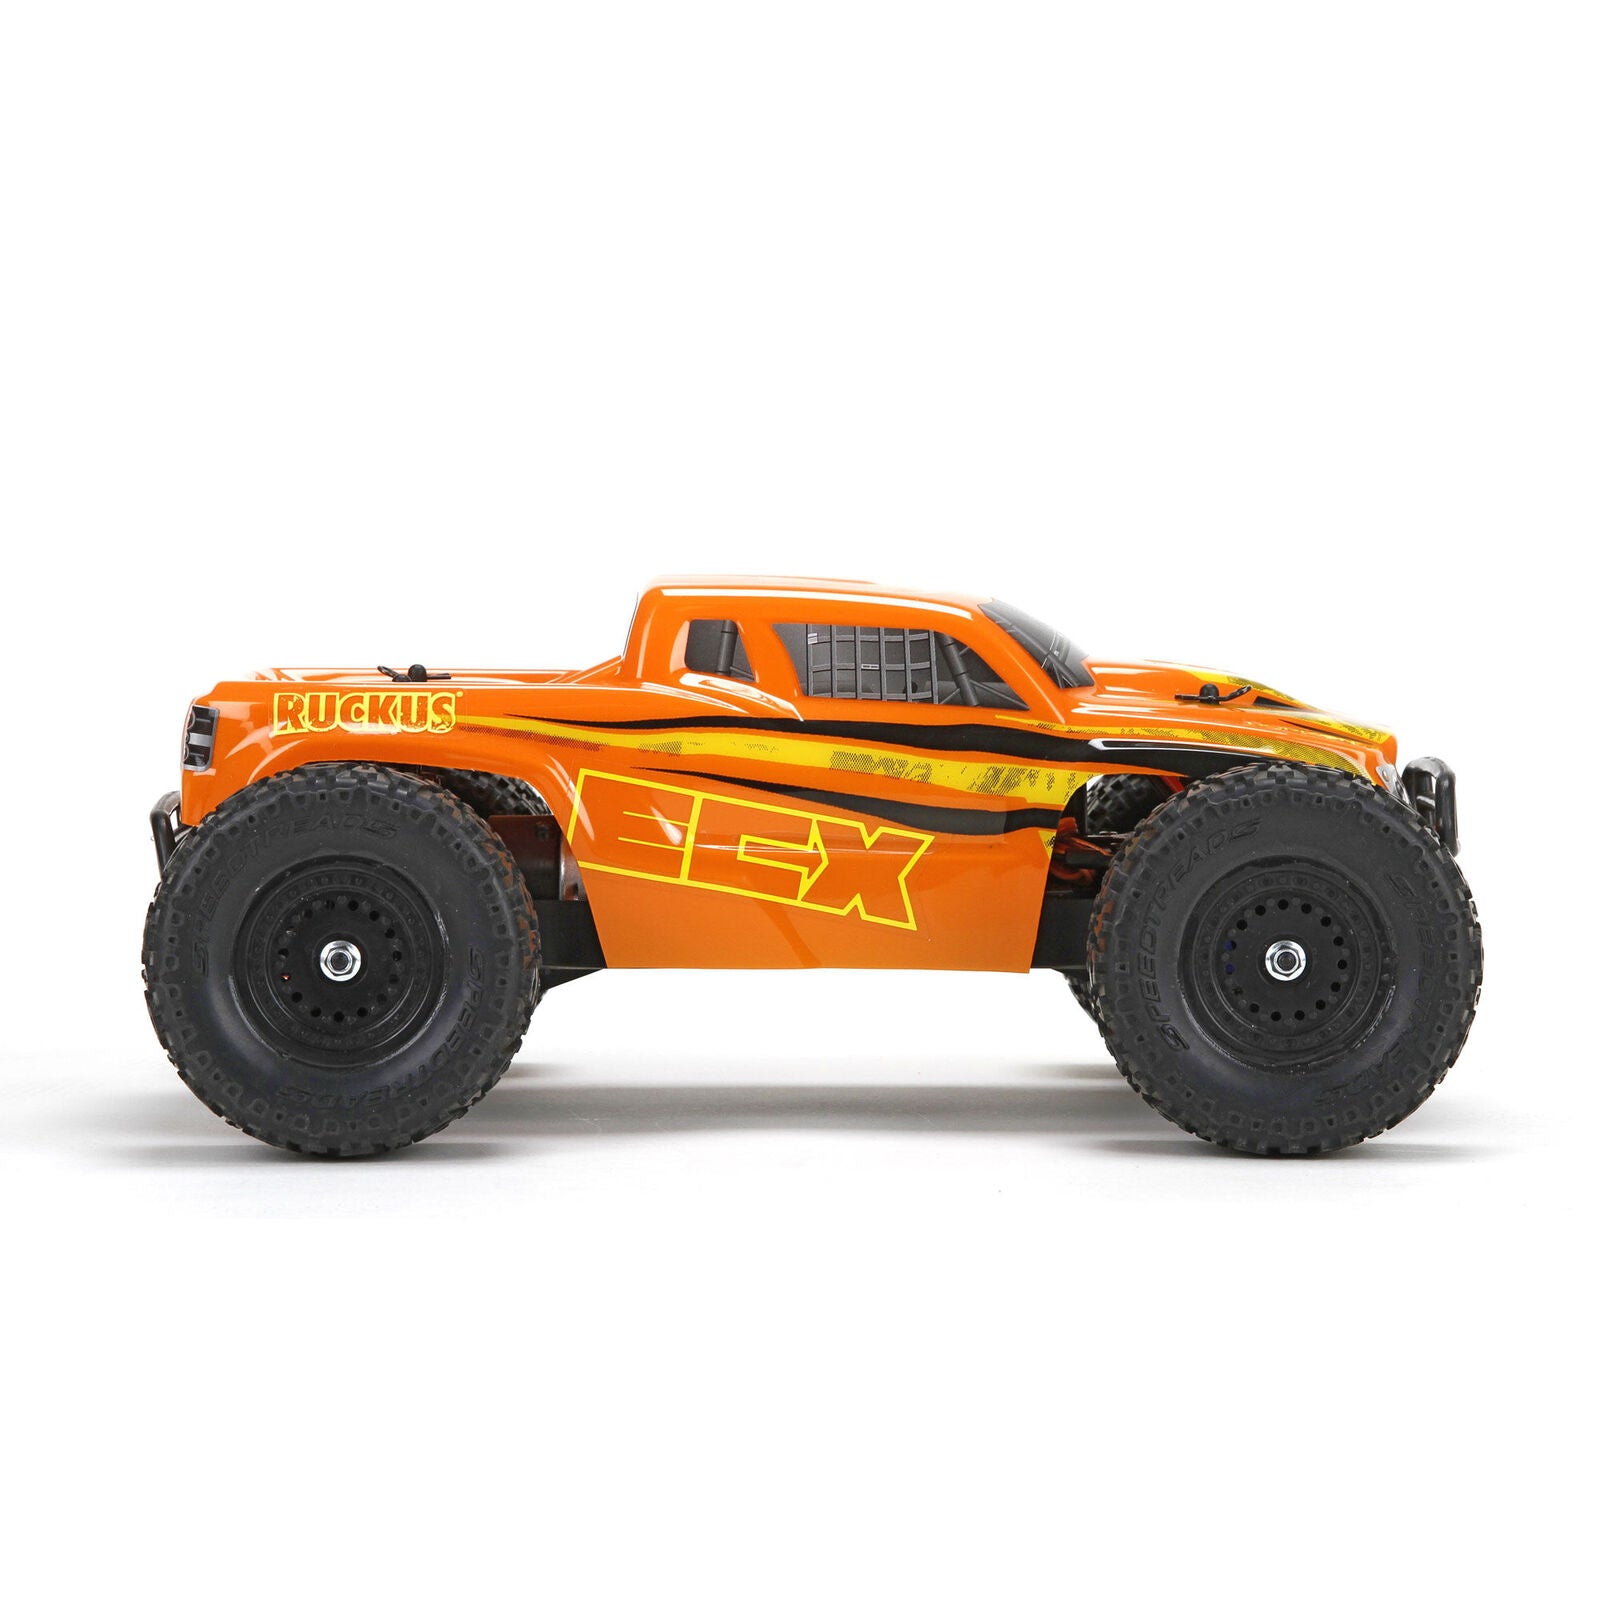 *DISCONTINUED* 1/18 Ruckus 4WD Monster Truck RTR Orange/Yellow